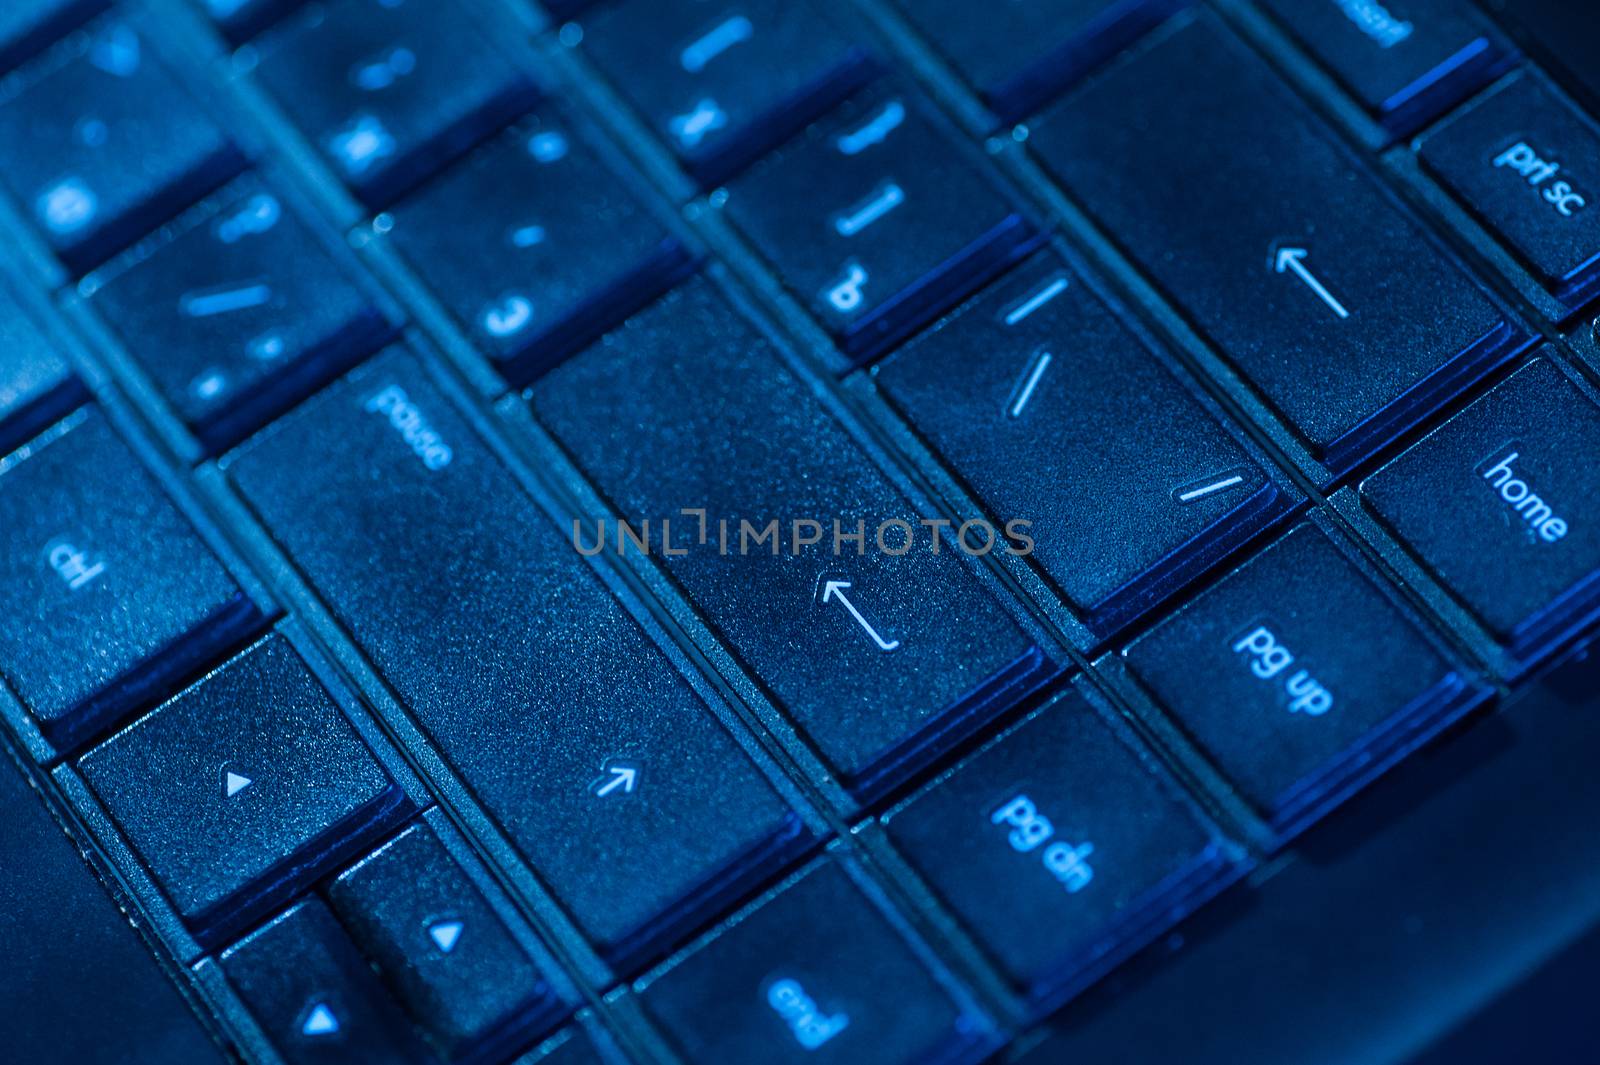 part of the notebook keyboard by timonko